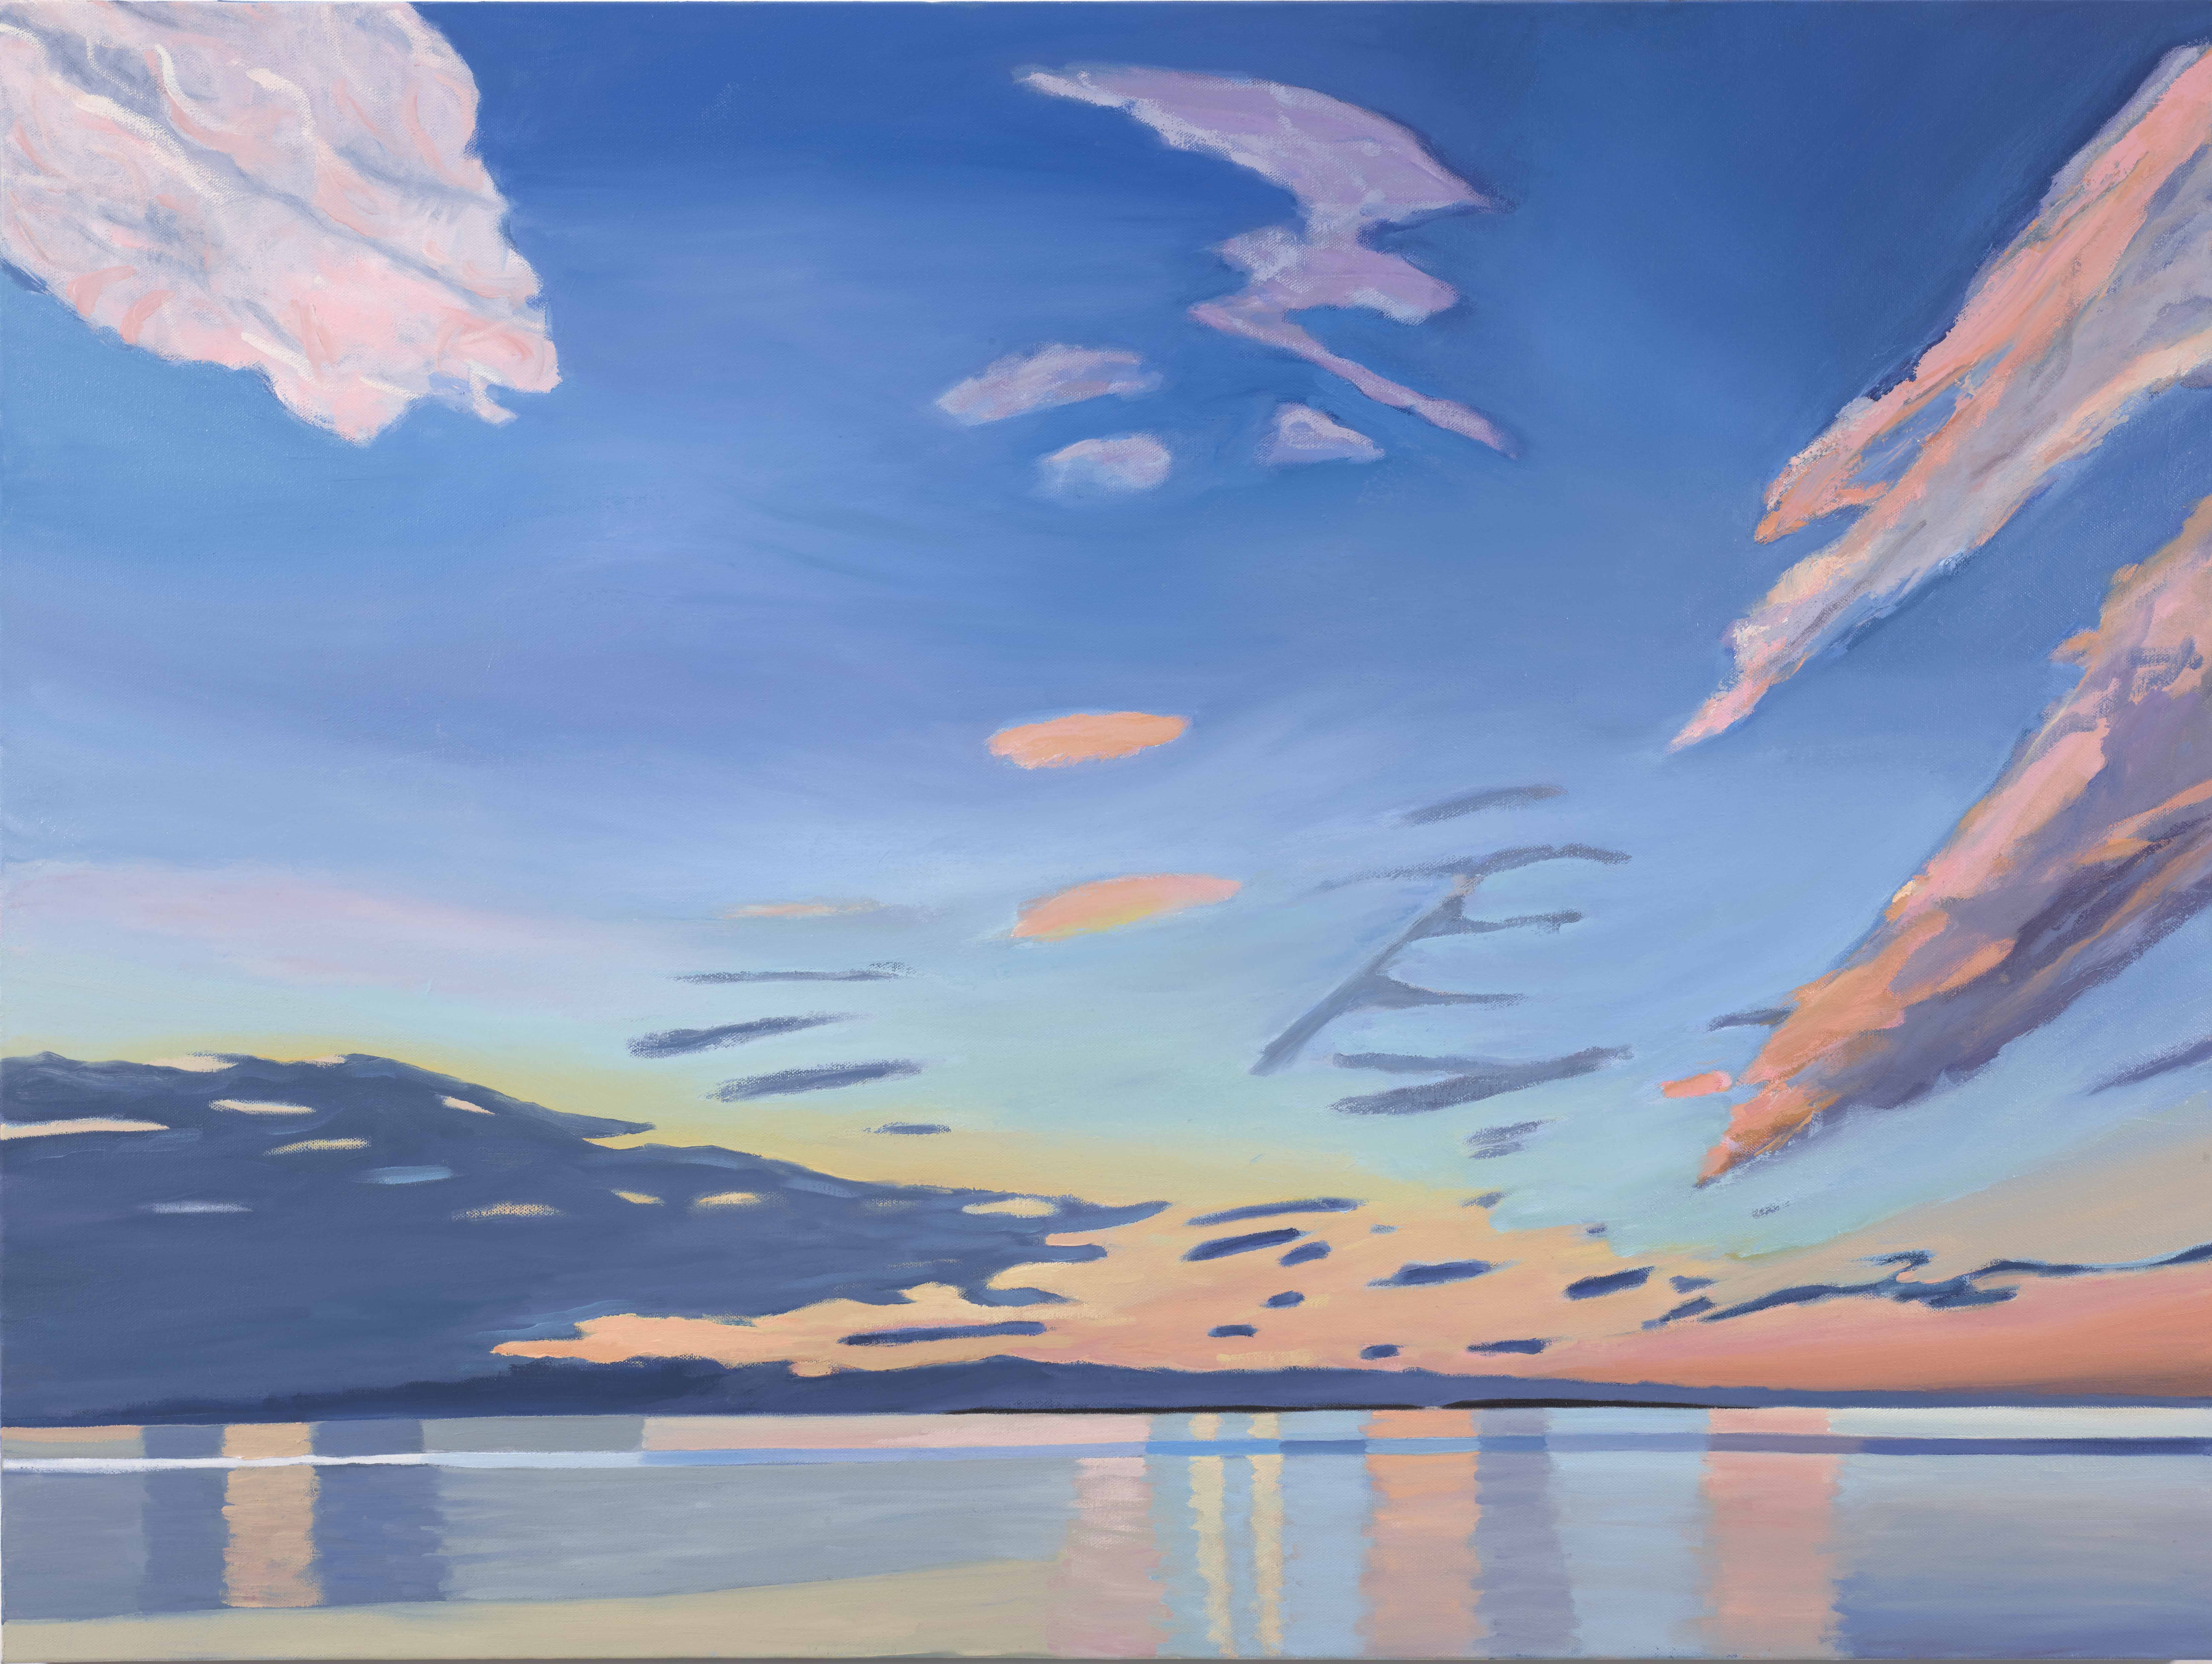 Day's End, 2019, oil on canvas, 30 x 40 inches